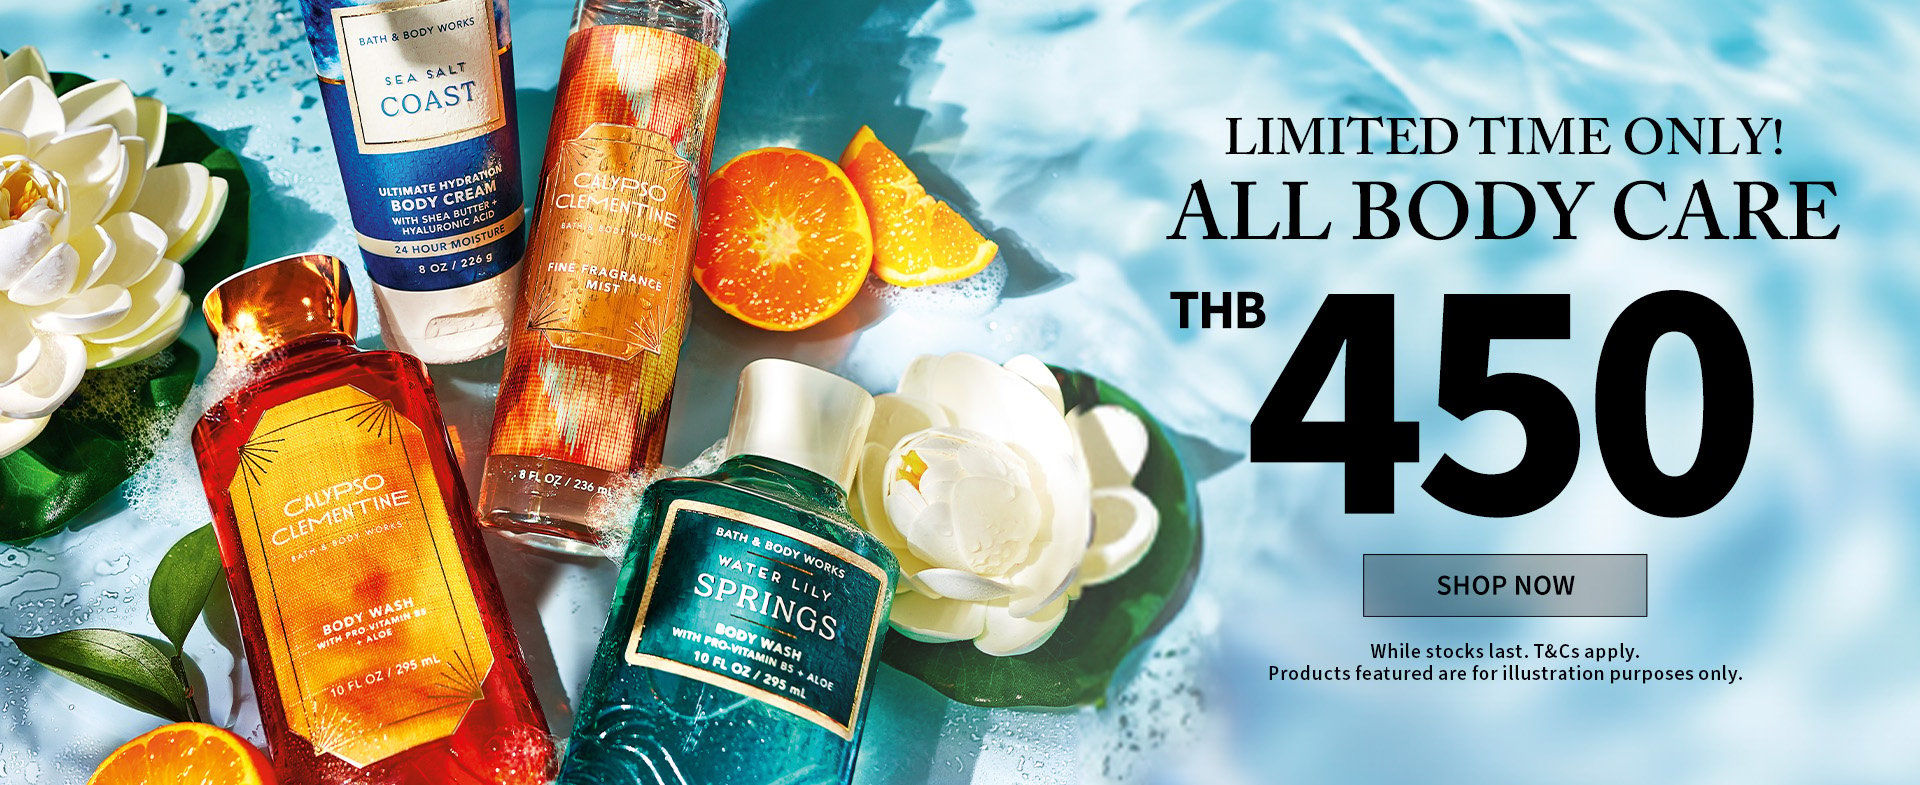 LIMITED TIME ONLY! ALL BODY CARE 